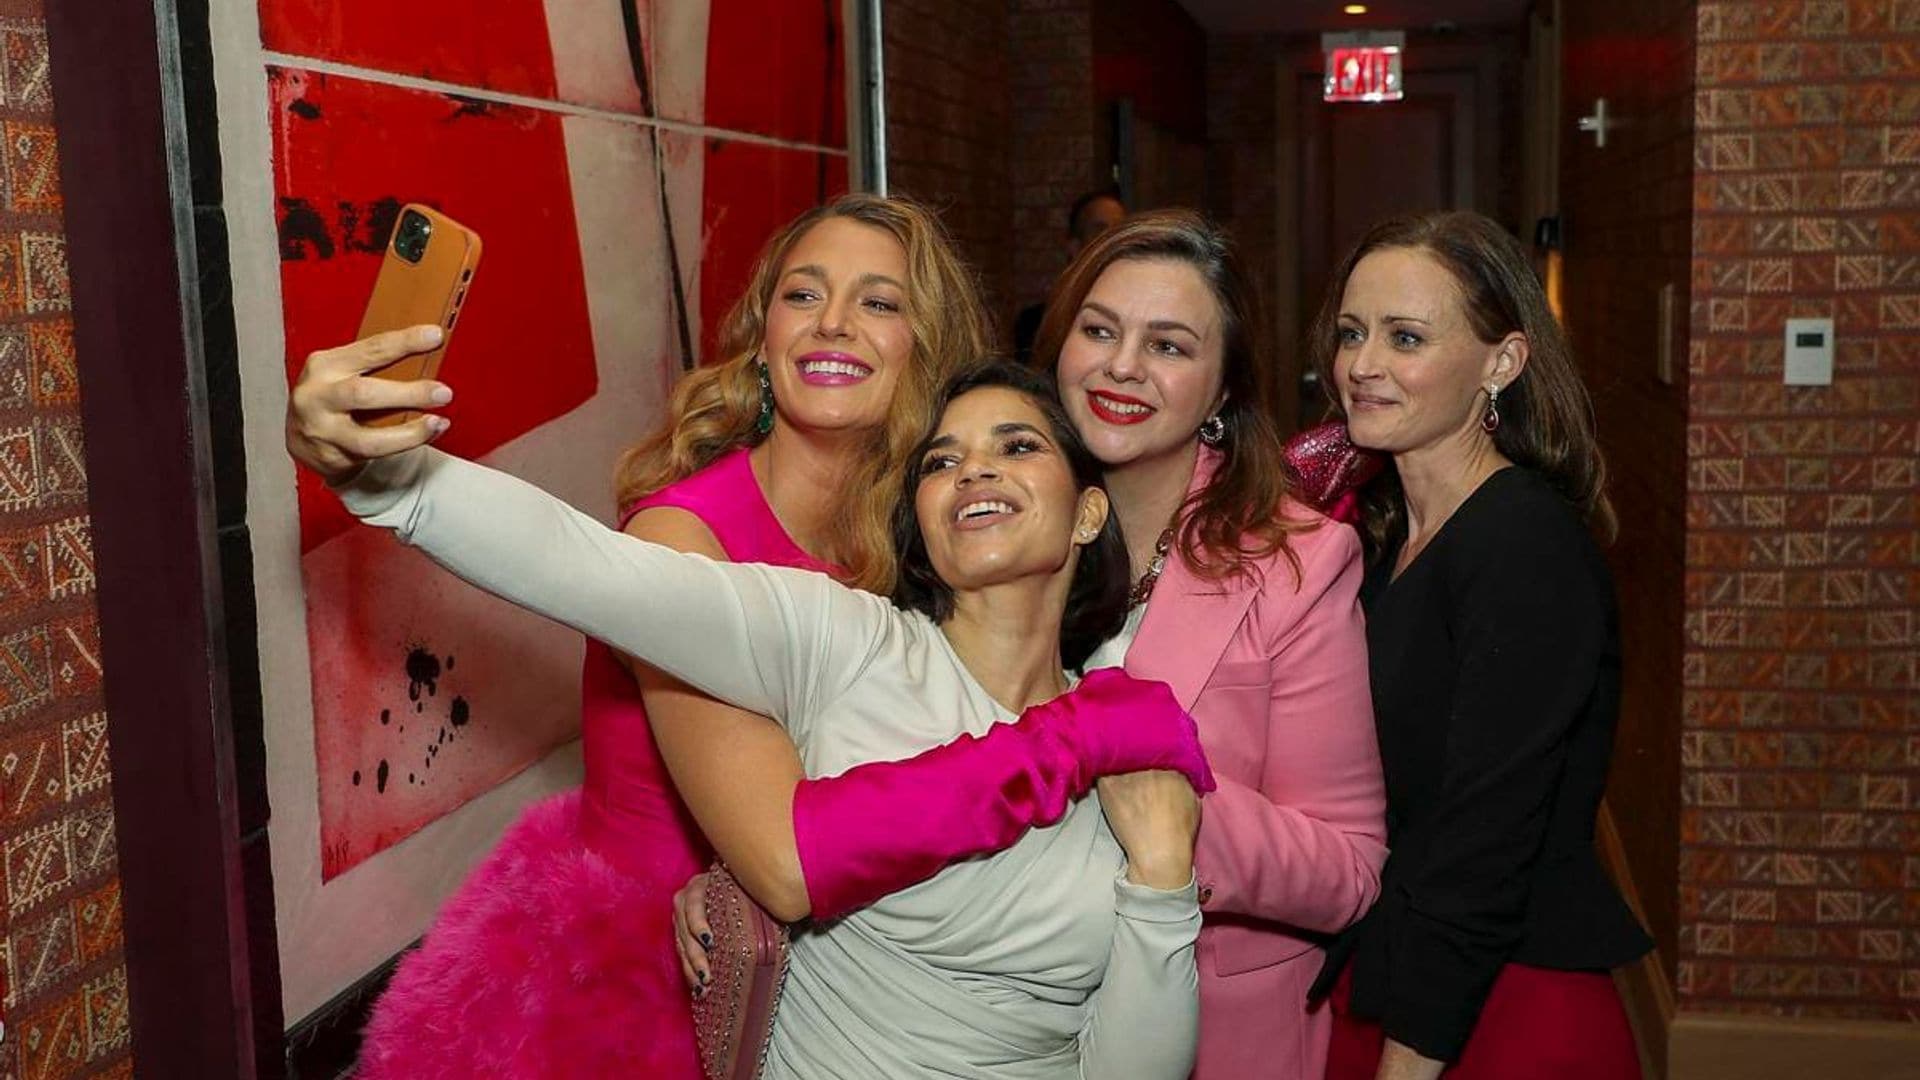 America Ferrera reunites with former co-stars Blake Lively, Amber Tamblyn, and Alexis Bledel